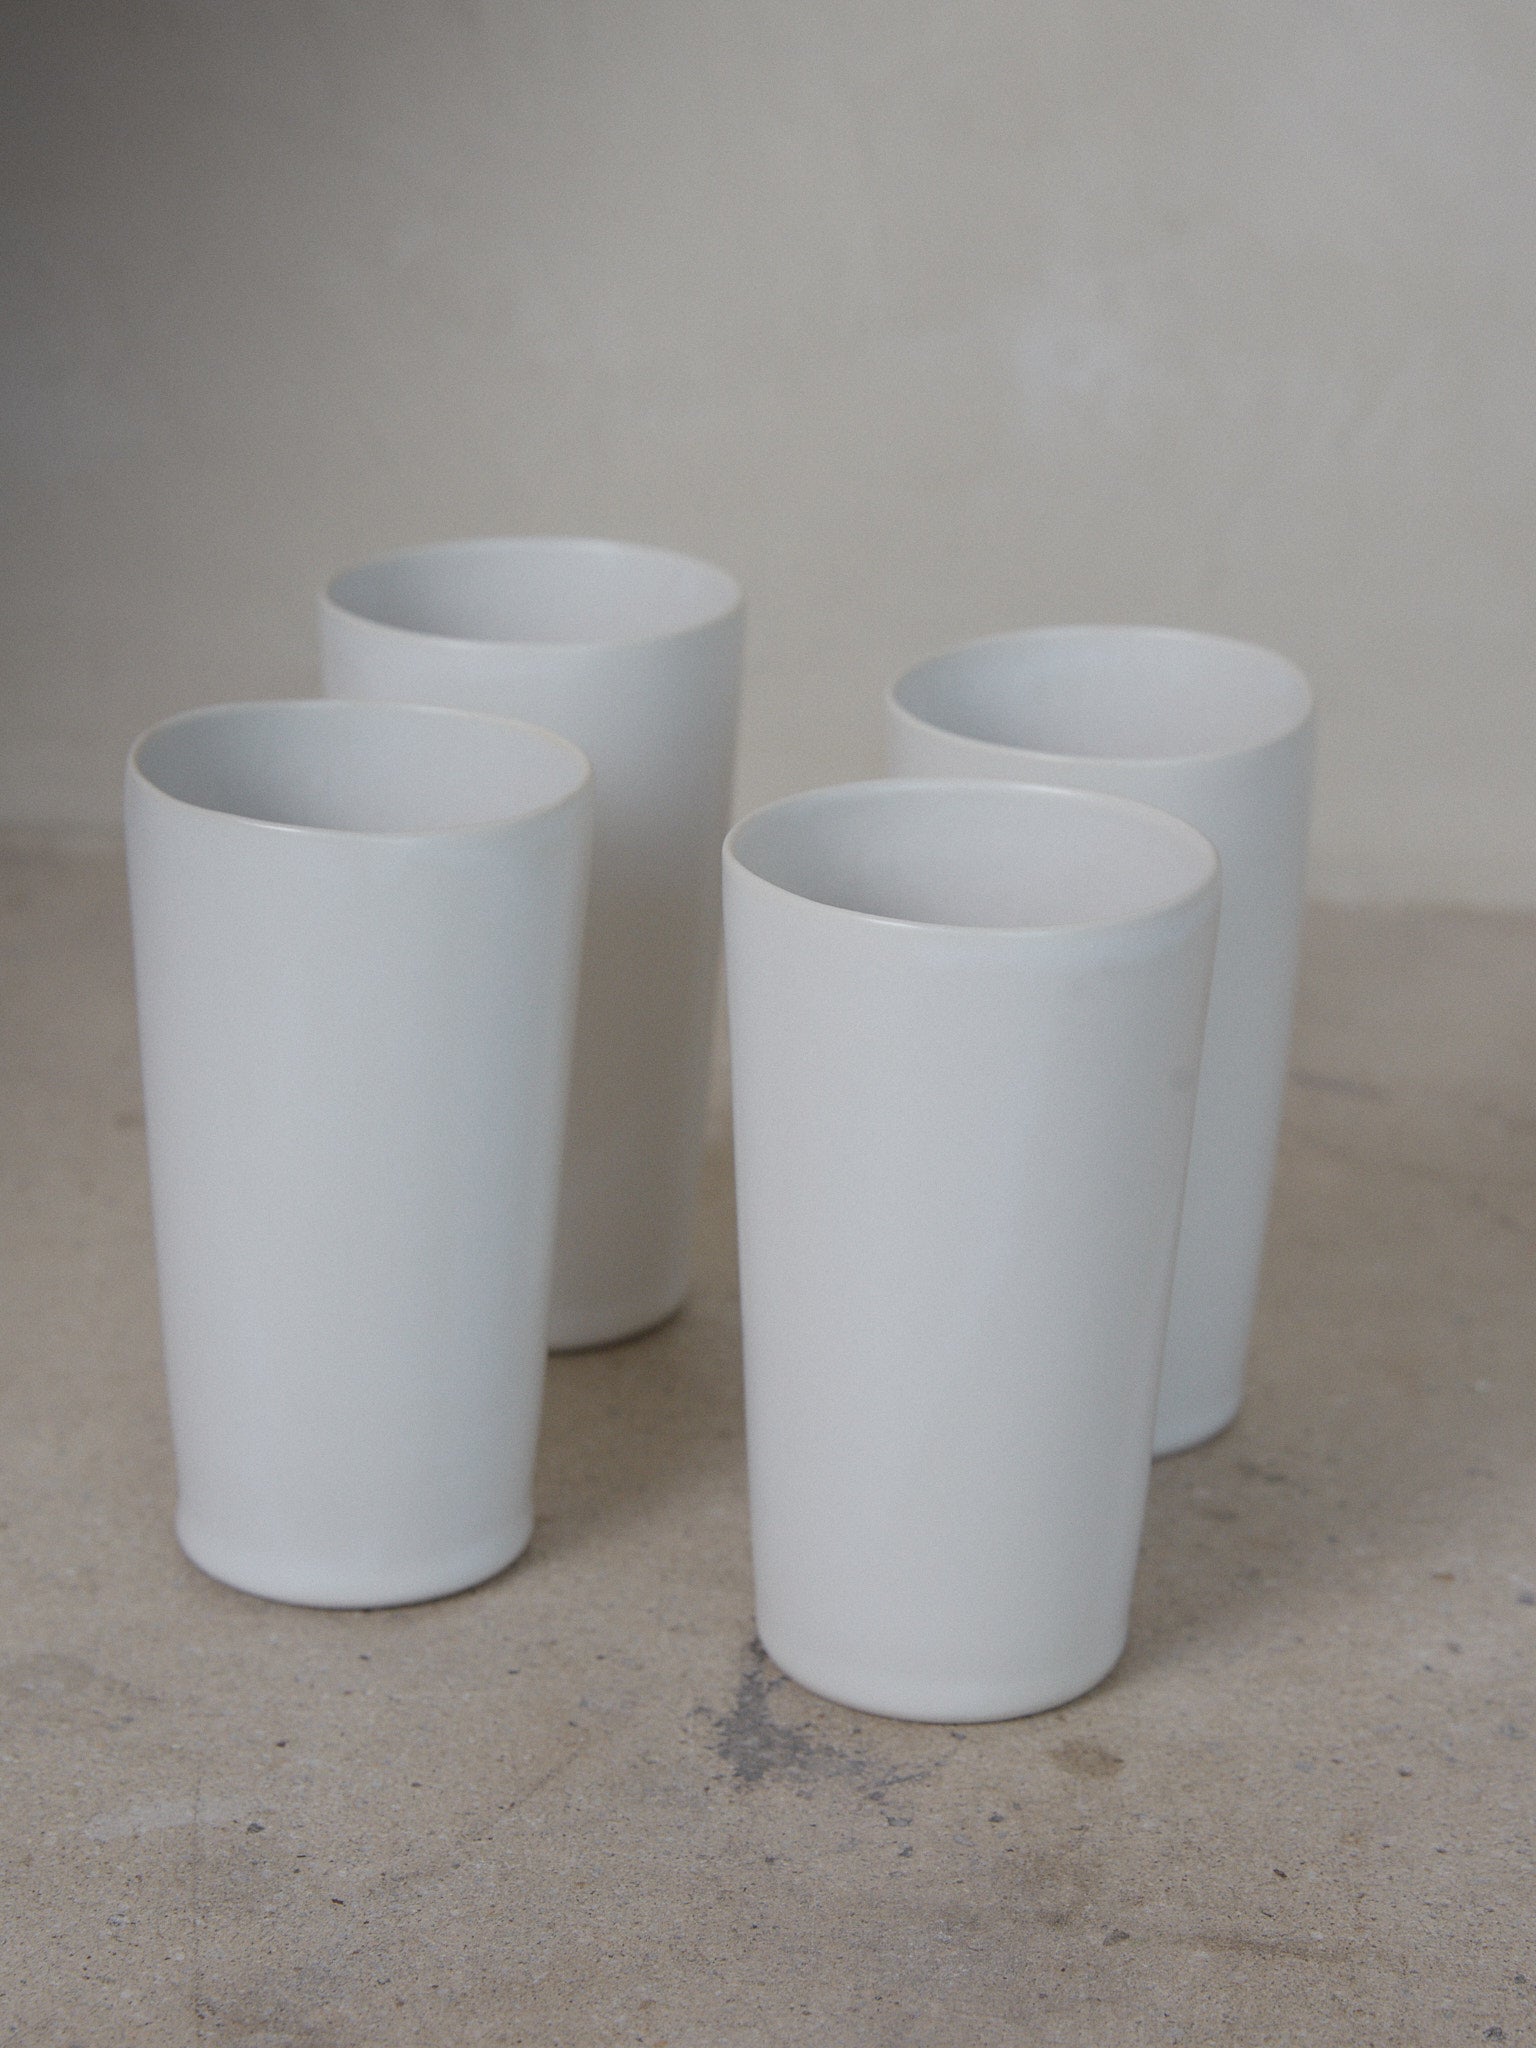 Raw Tumbler. Exclusively ours. Our hand crafted ceramic tumblers are a casual everyday essential for cold or hot beverages in classic matte, milky white stoneware.